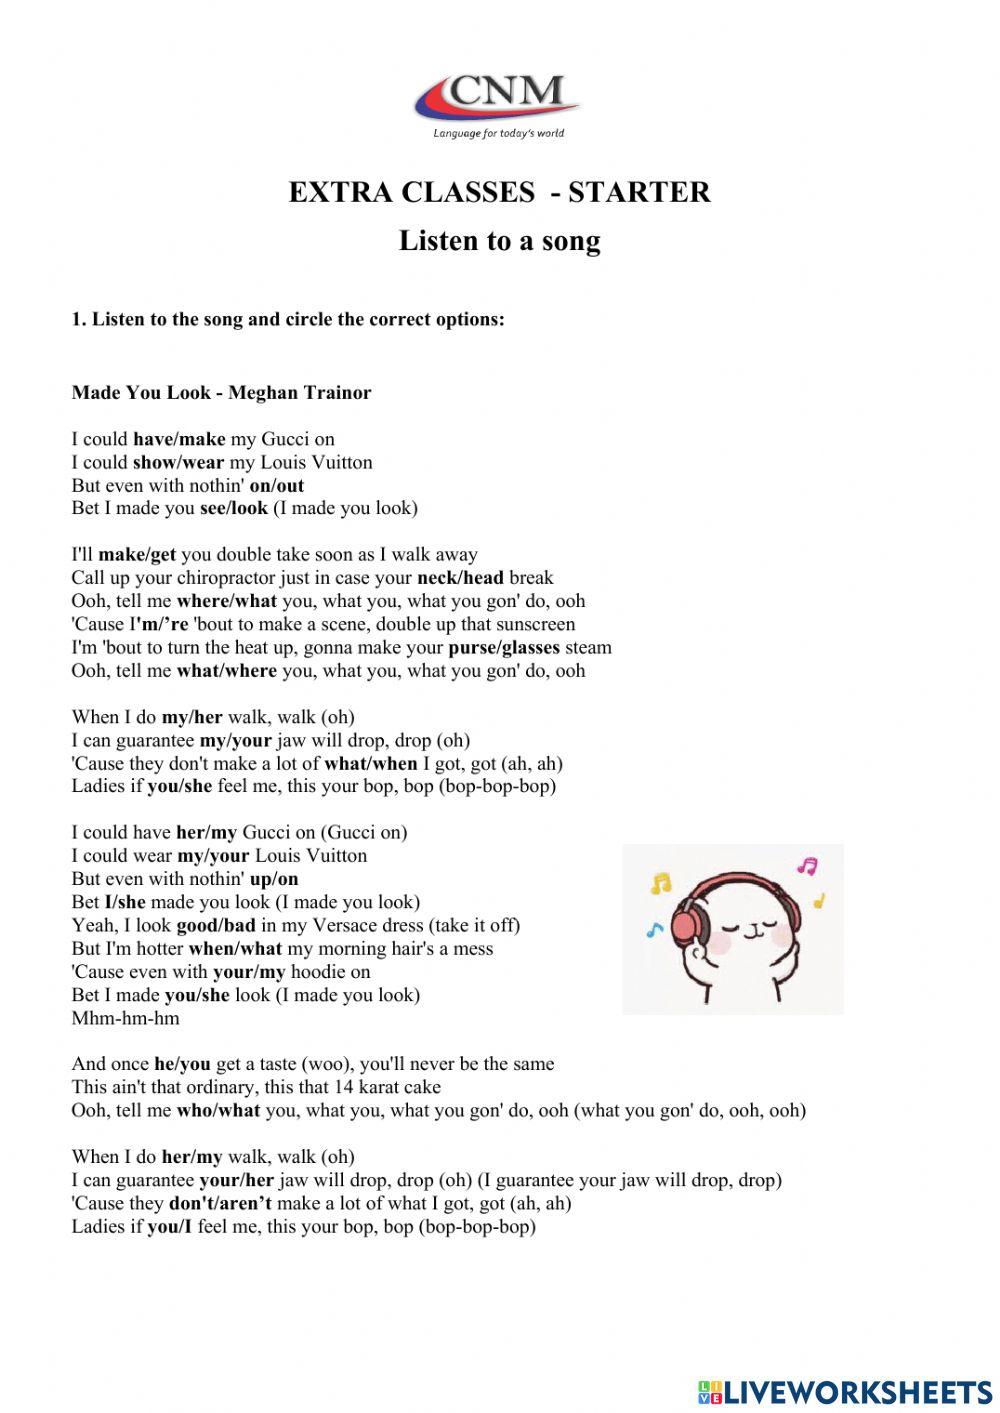 Listen to a song: Made you look worksheet